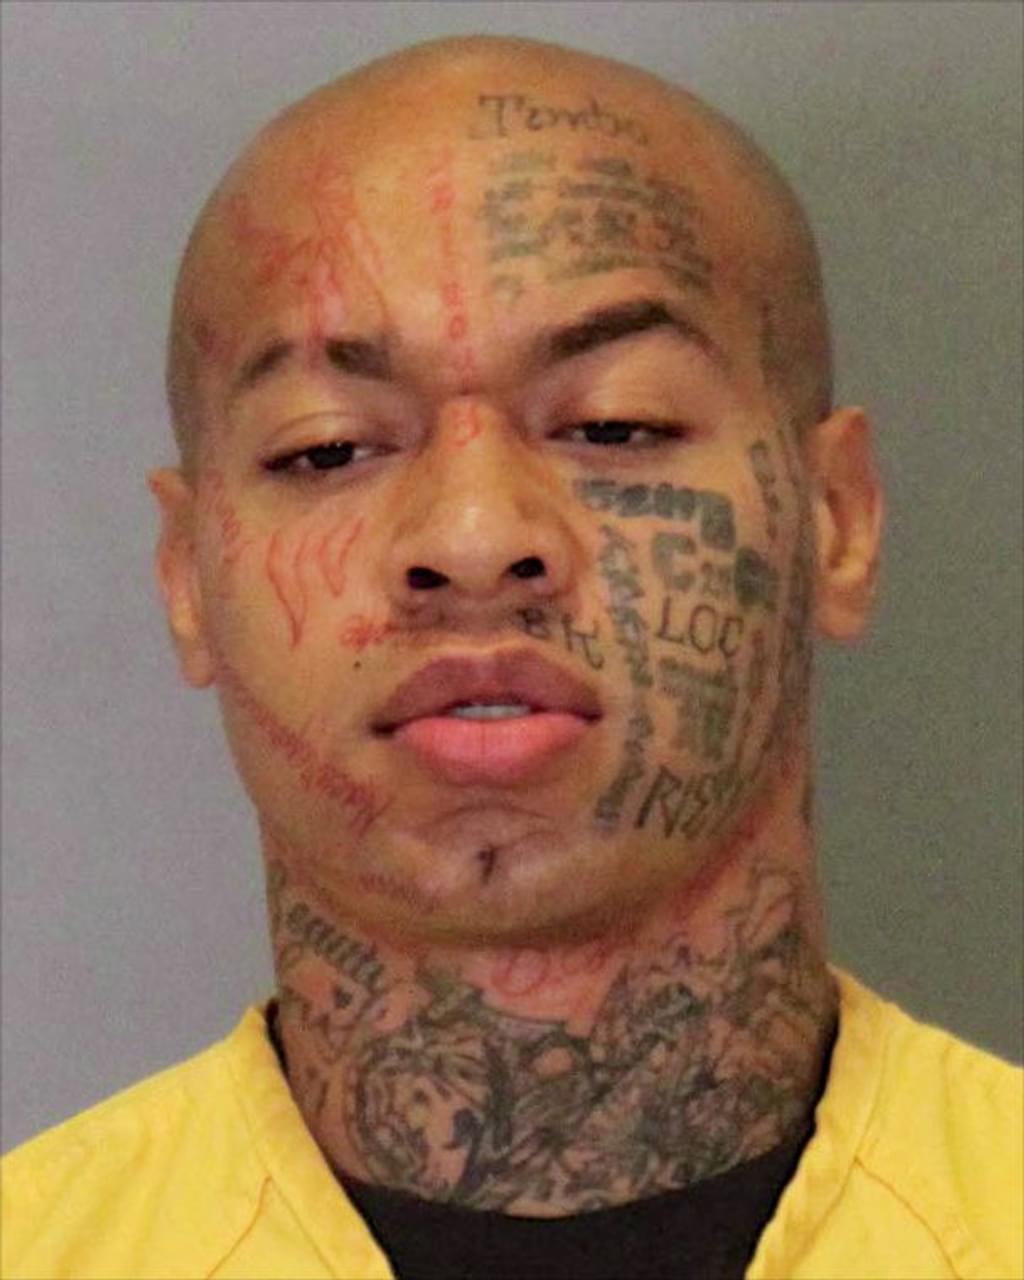 Death-Penalty News and Developments for the Week of July 15 – 21, 2019: Nebraska Supreme Court Upholds Death Penalty for Nikko Jenkins